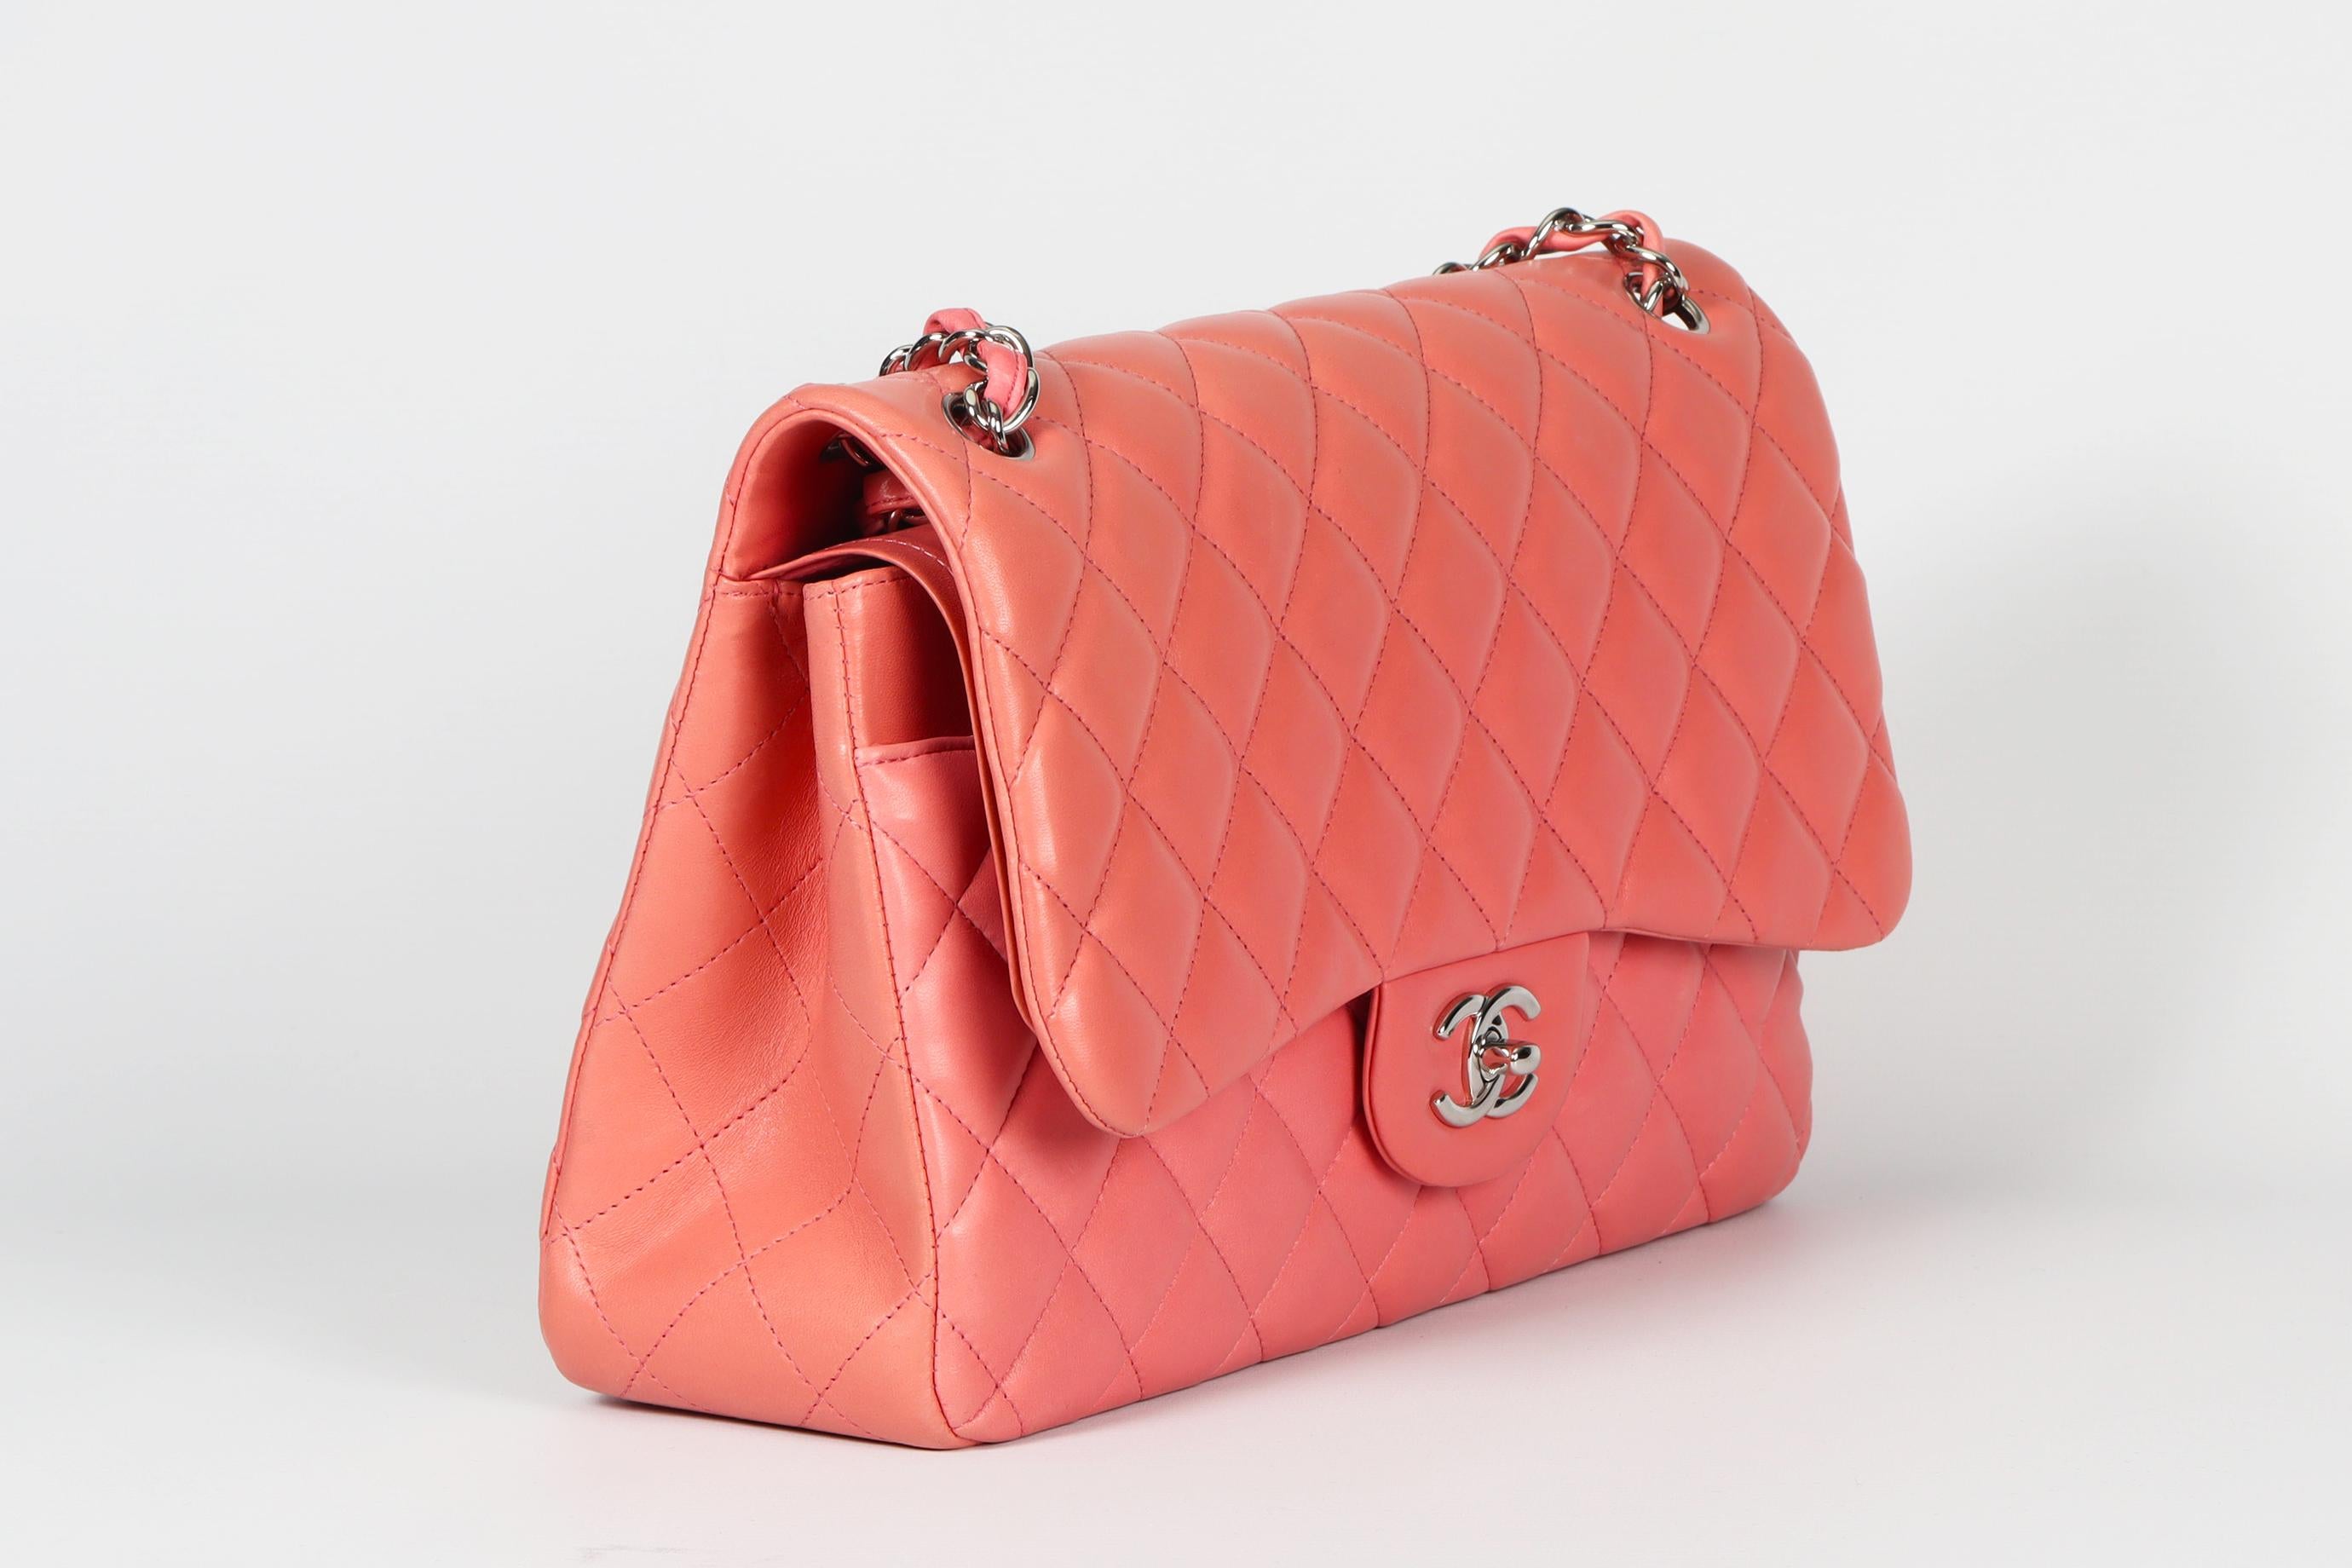 Chanel 2012 Classic Jumbo Double Flap Quilted Leather Shoulder Bag en vente 4